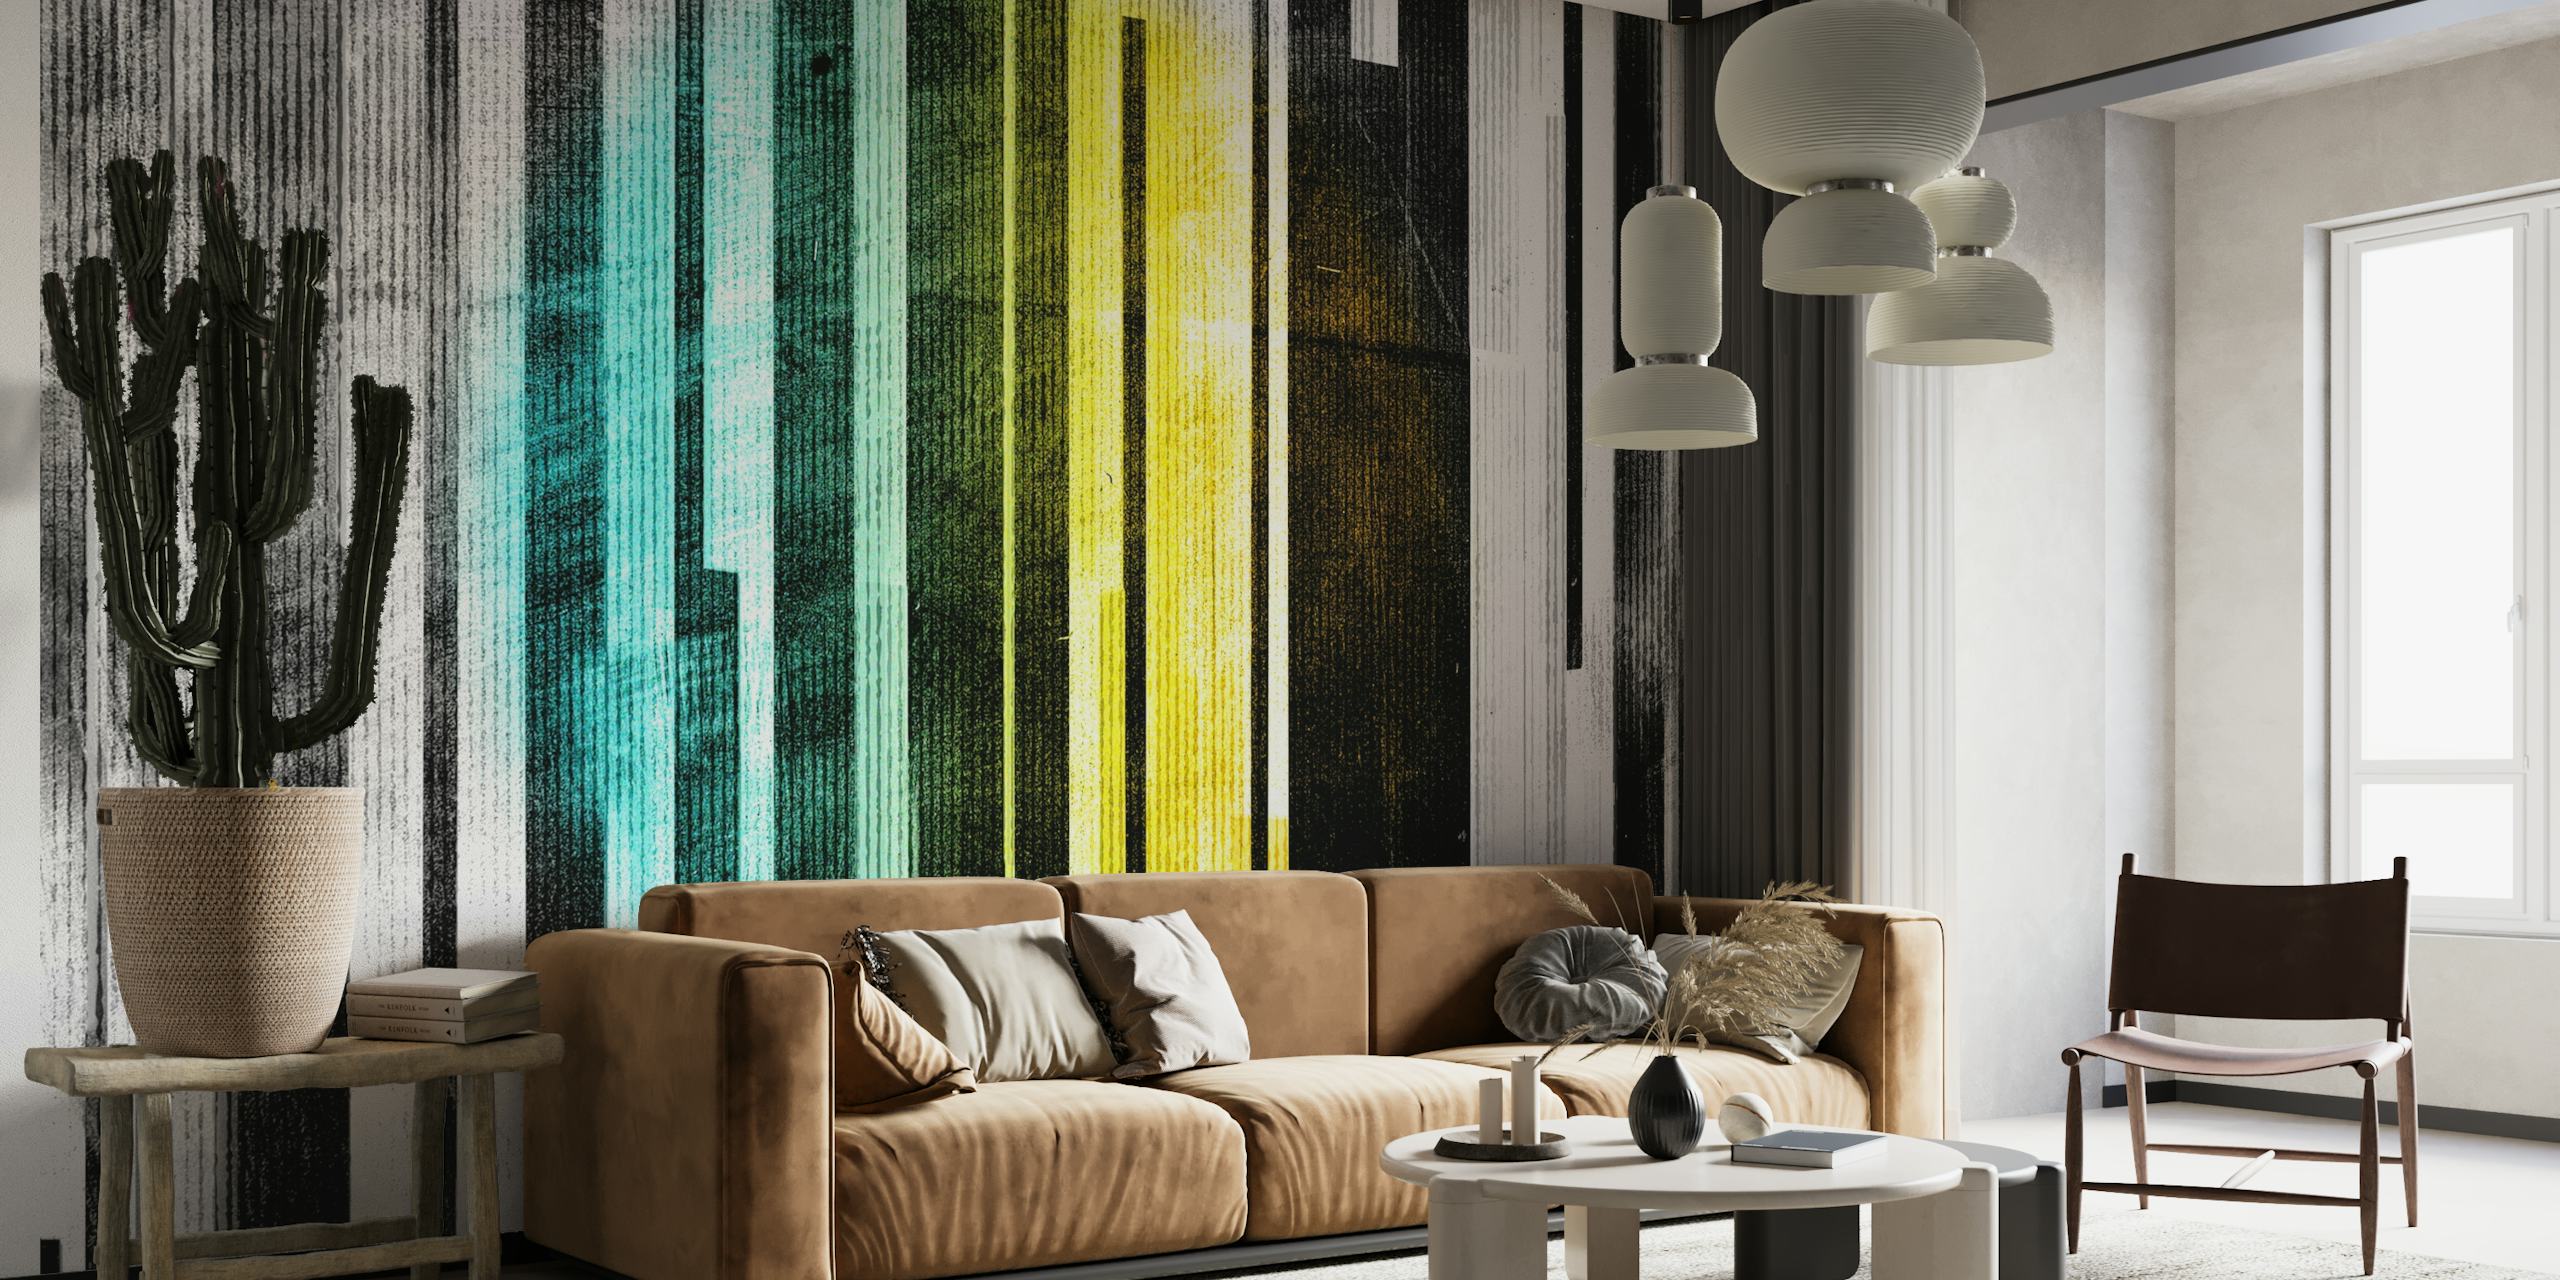 Abstract wall mural with vertical lines in black, white, aquamarine, and yellow